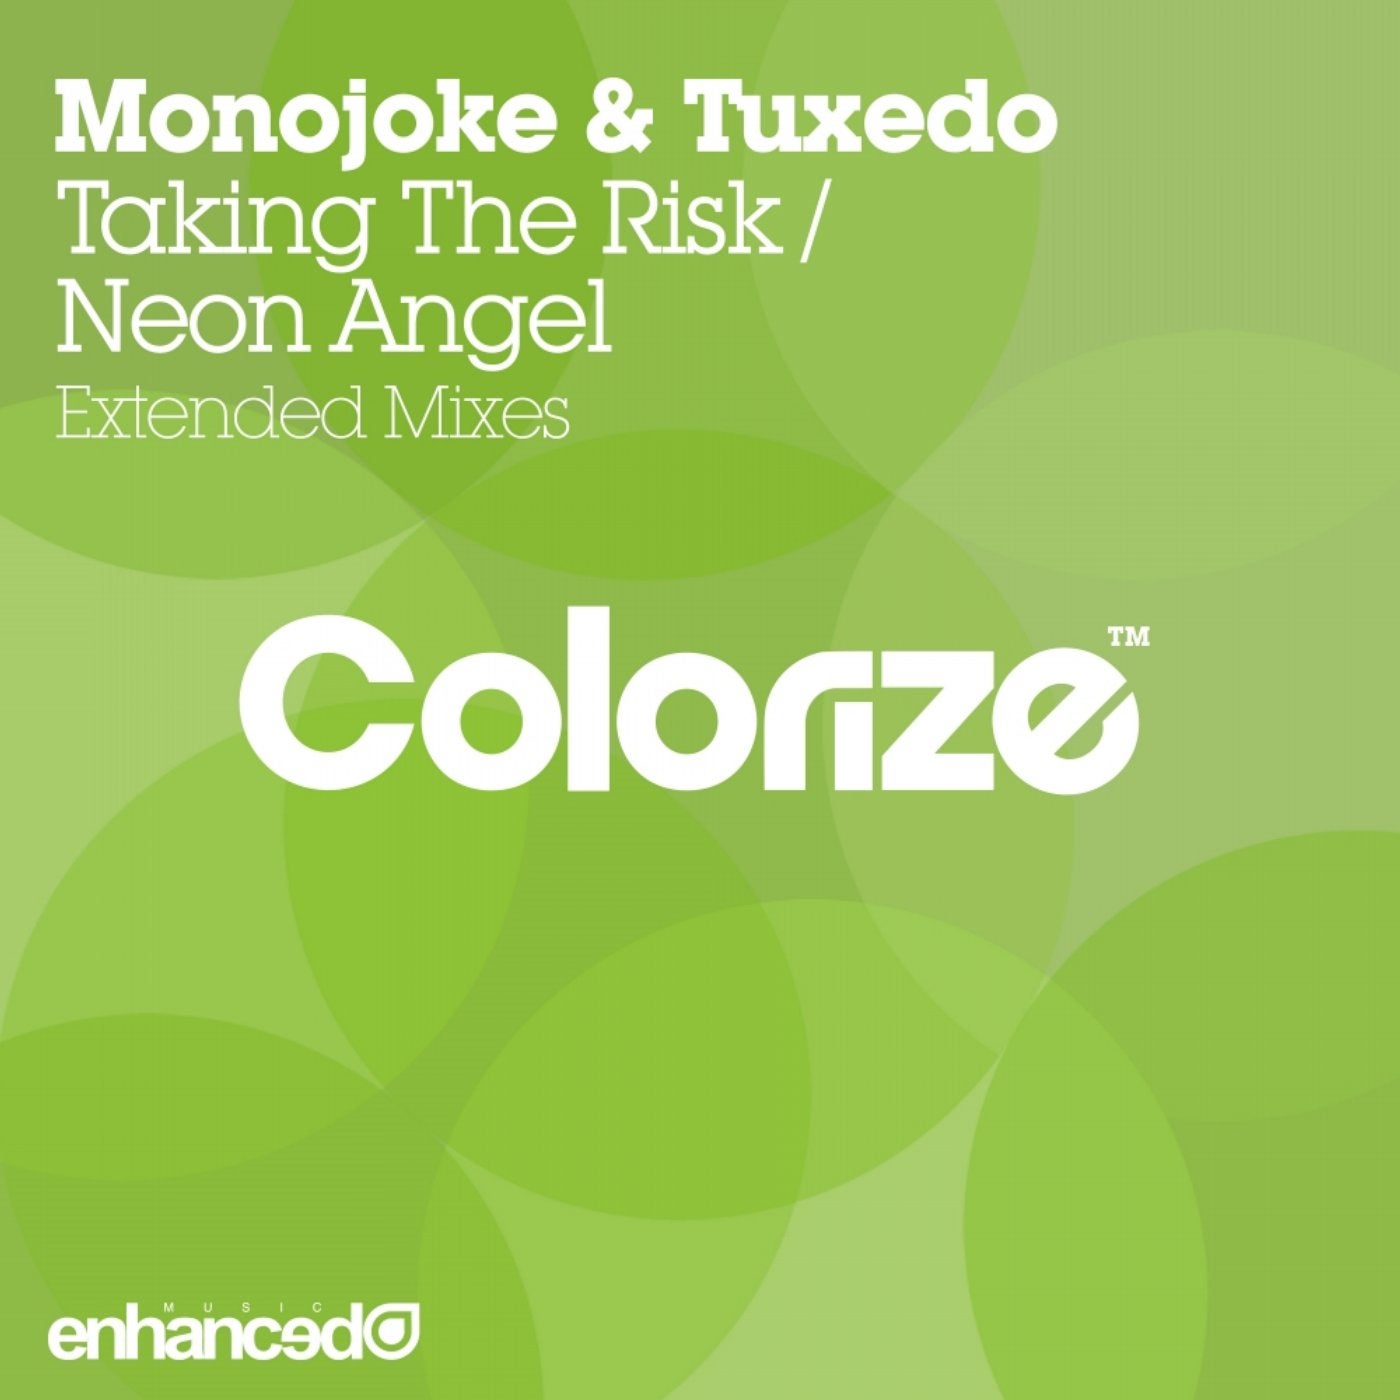 Taking The Risk / Neon Angel